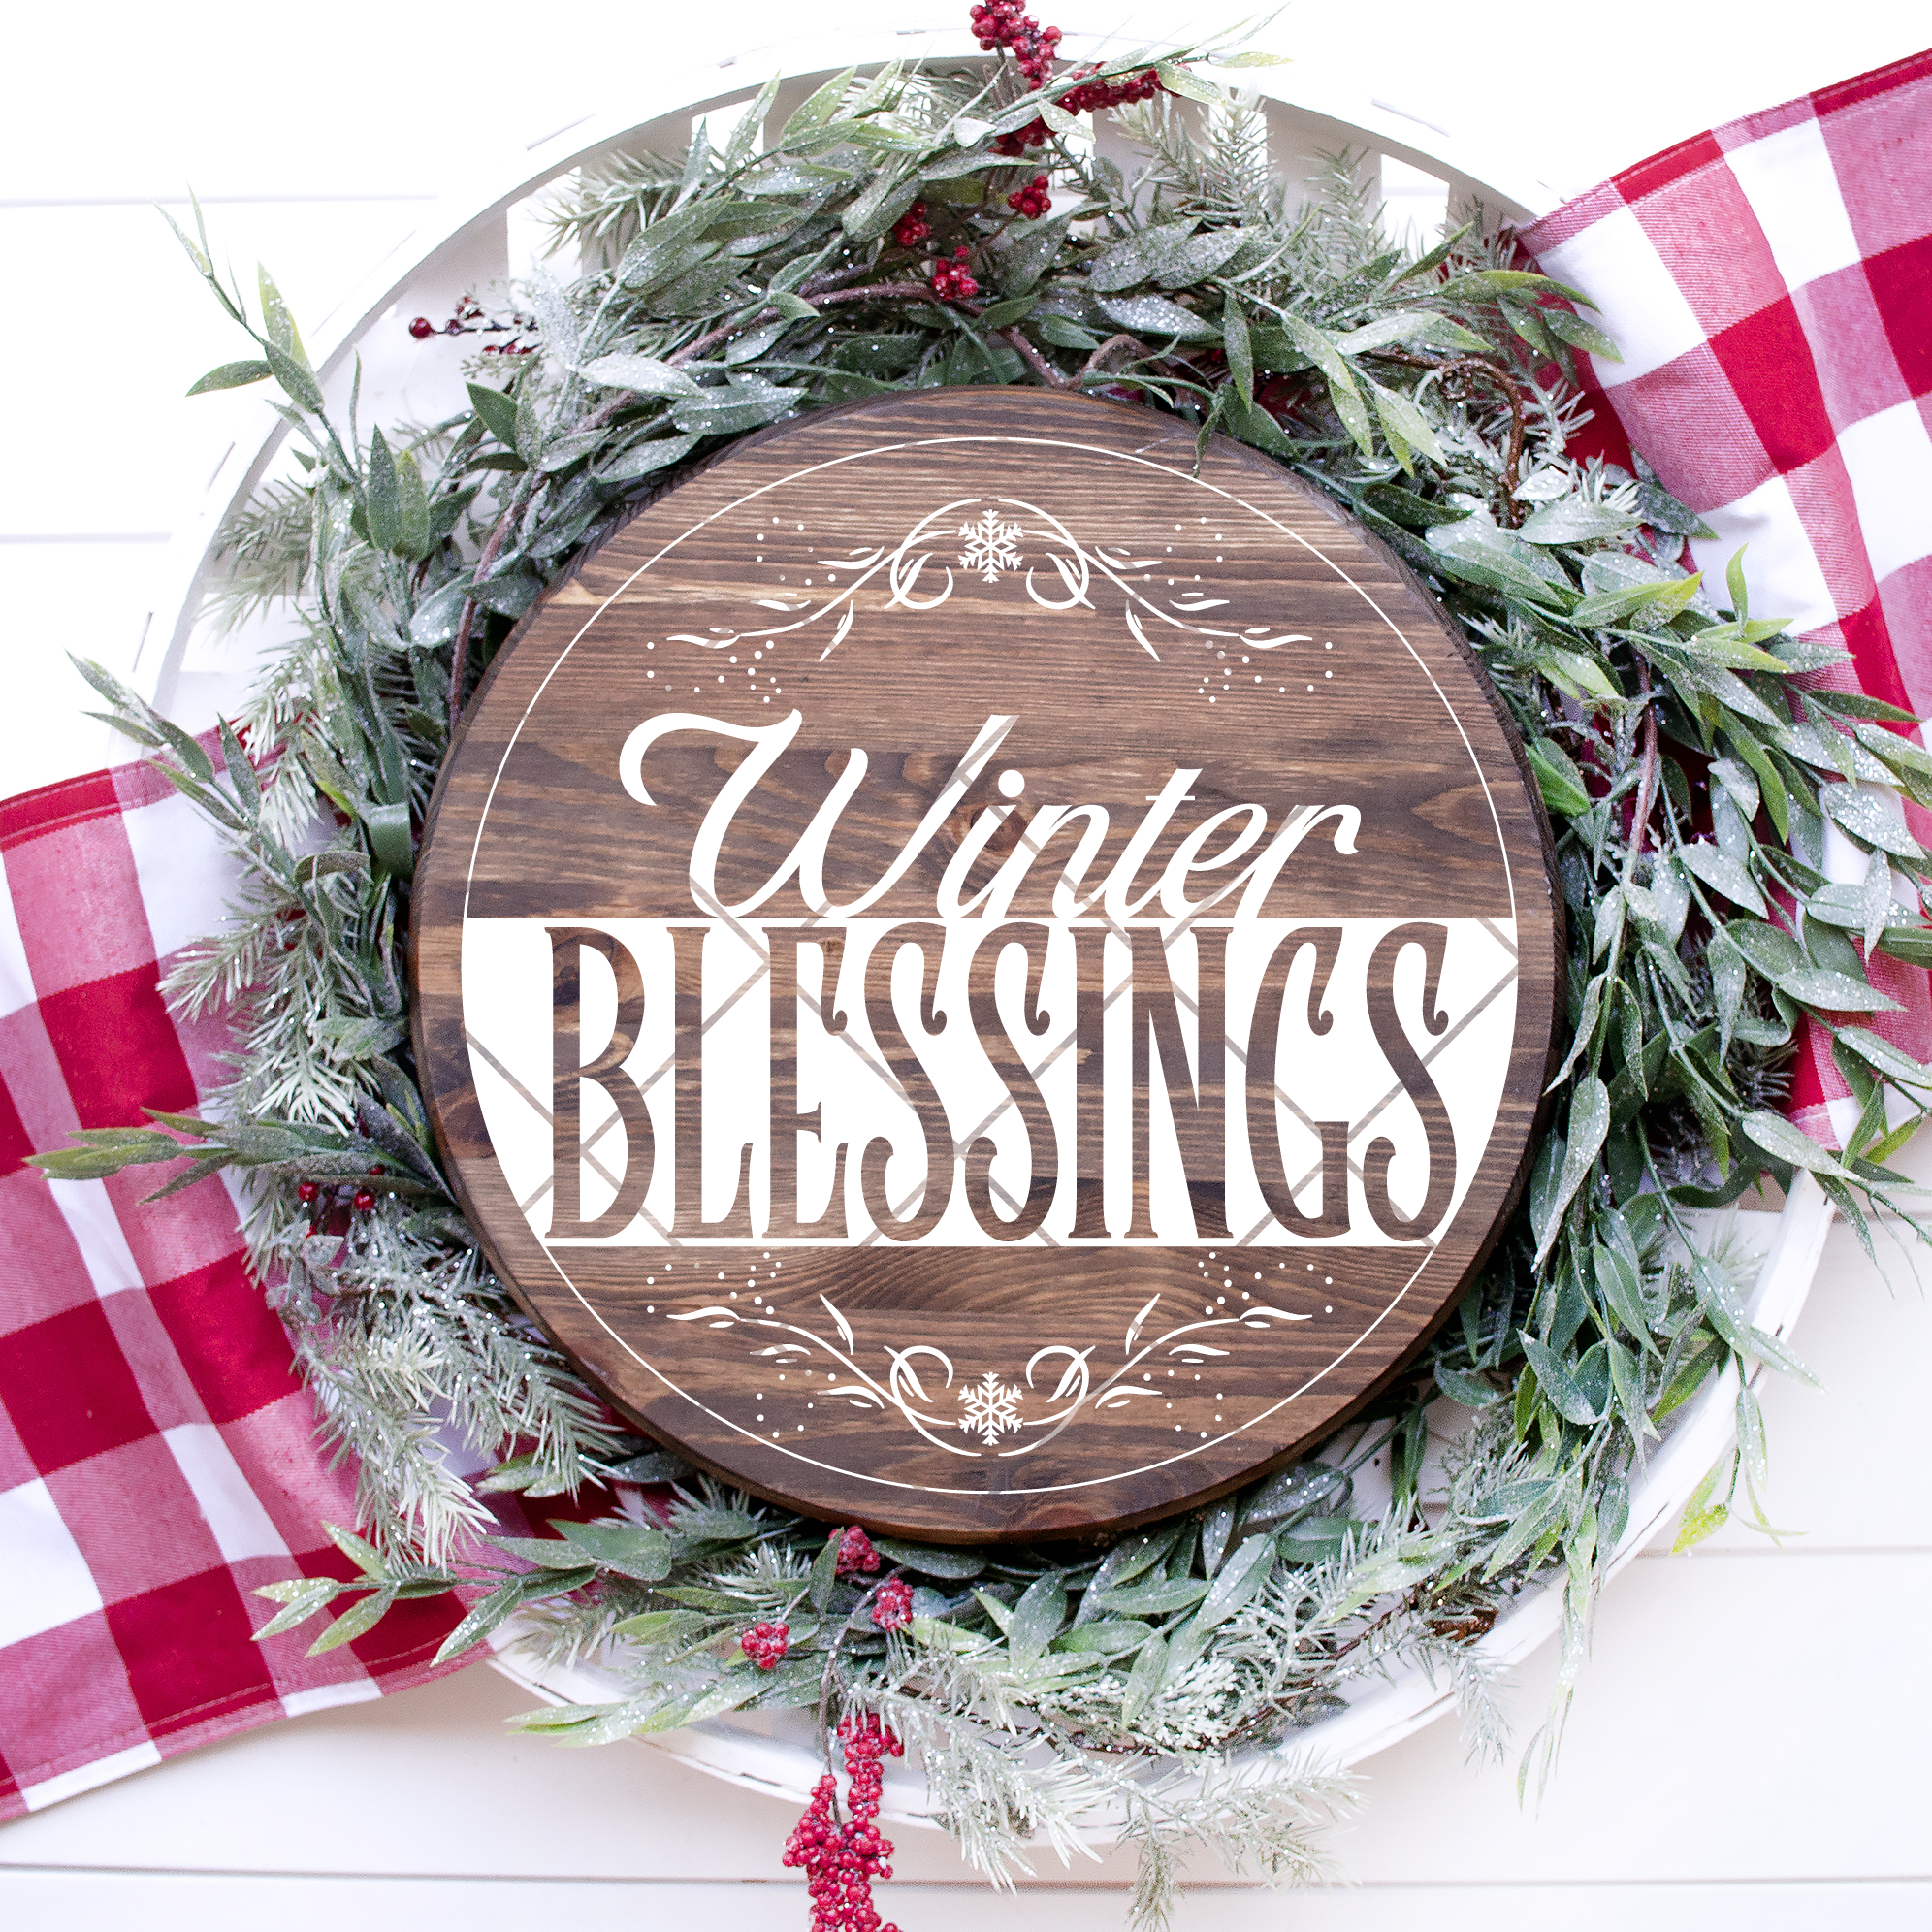 Winter Blessings SVG File for Cricut/Silhouette/Glowforge/Laser crafting - Commercial Use SVG Files for Cricut & Silhouette